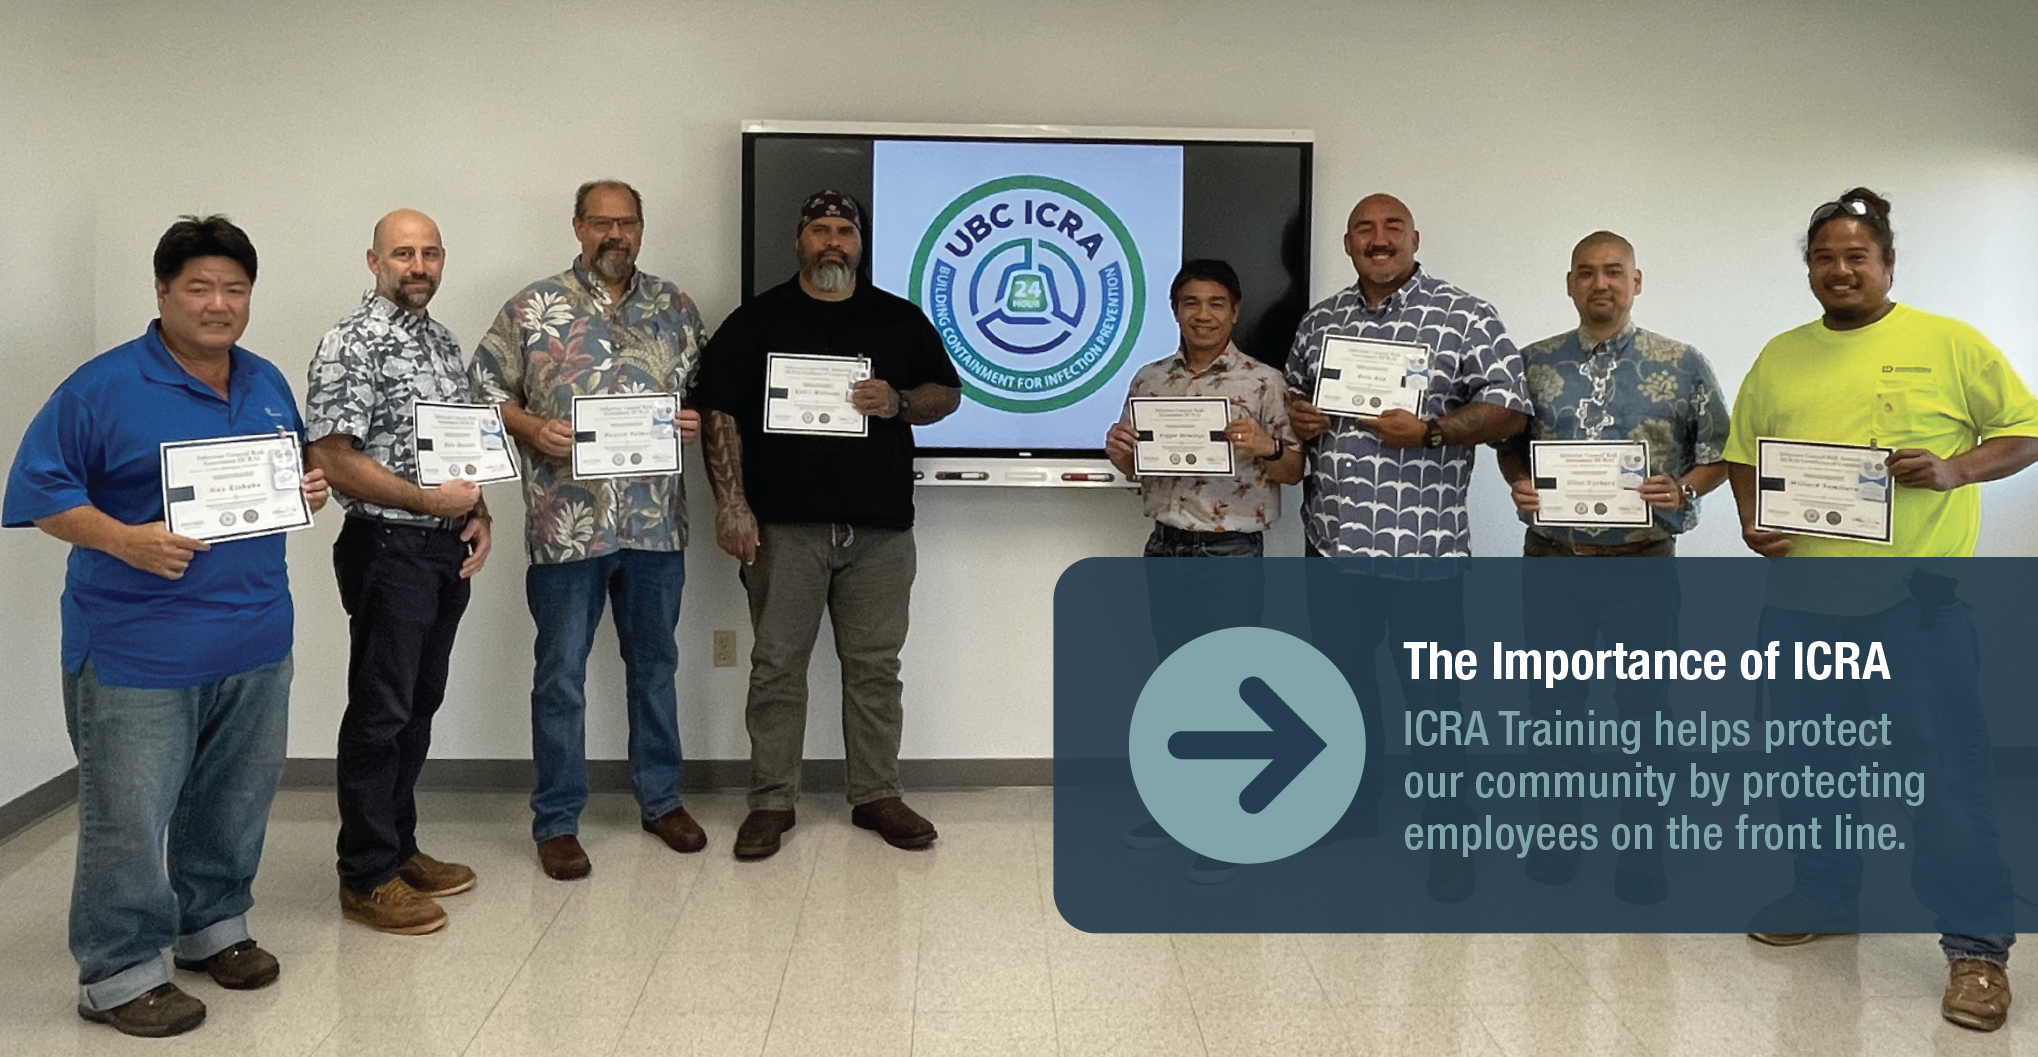 Participants from the 24 Hour ICRA course pose proudly inside an HCATF classroom, with certificates in hand.